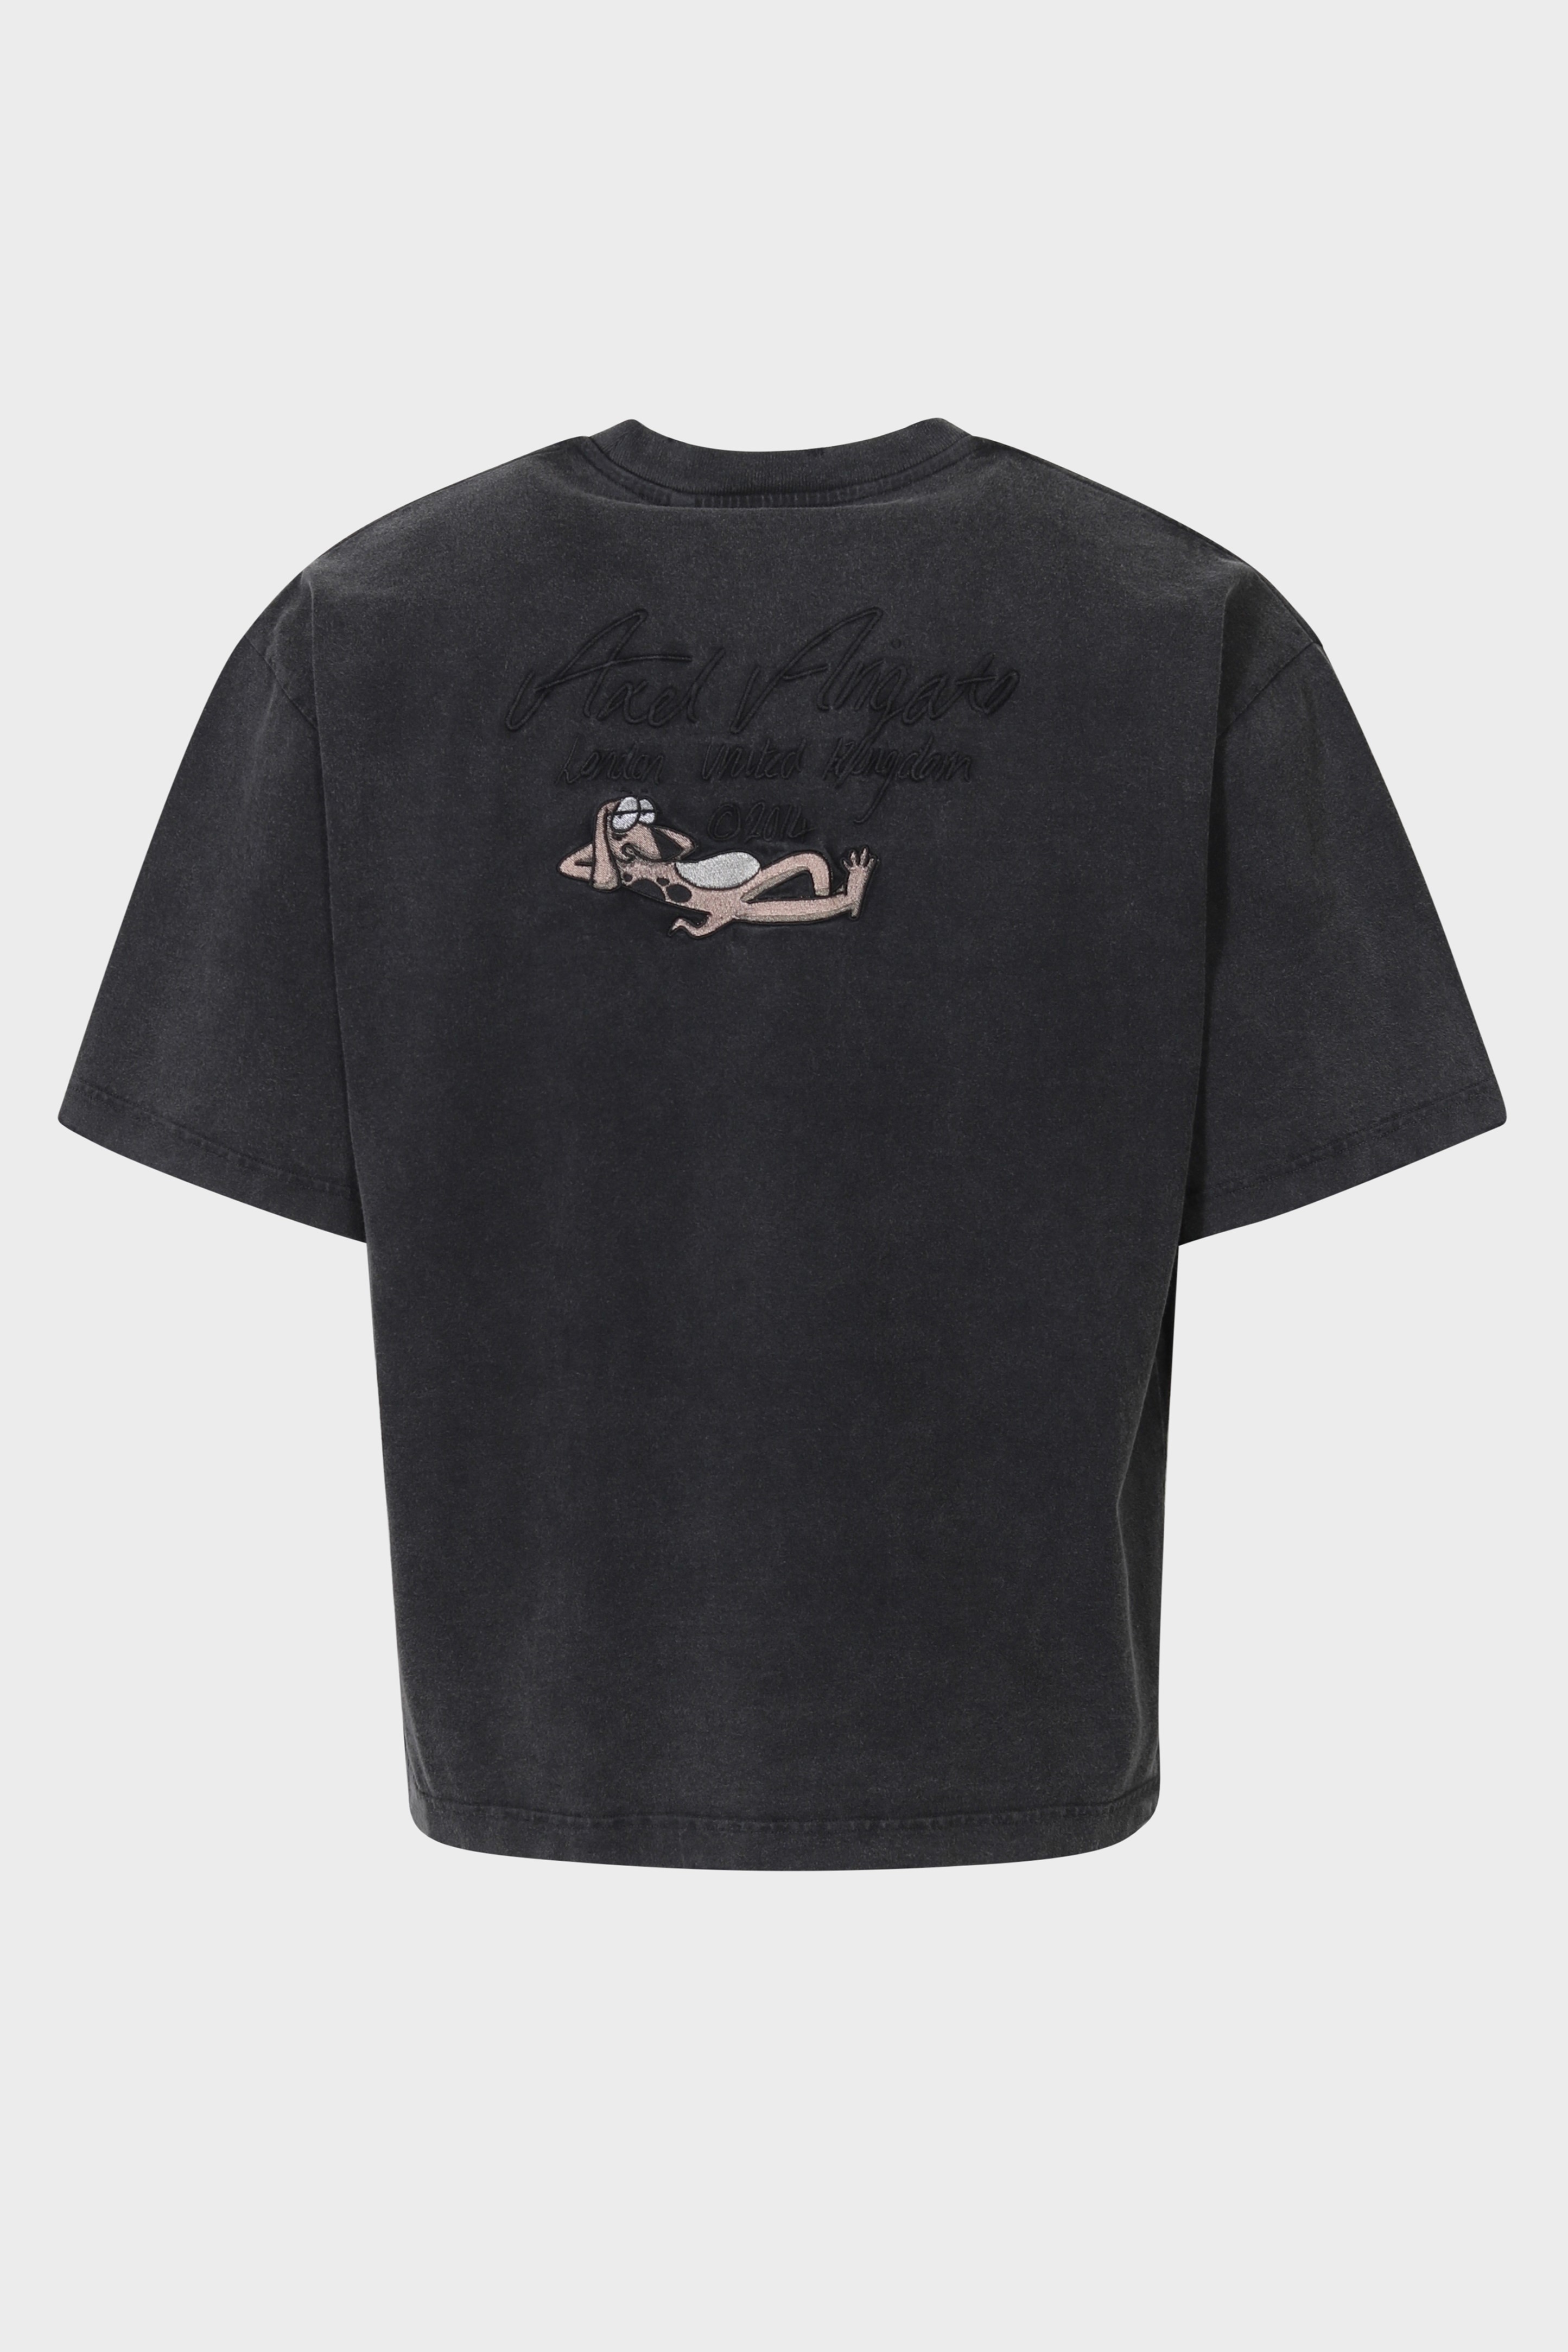 AXEL ARIGATO Wes Distrezzed T-Shirt in Washed Black